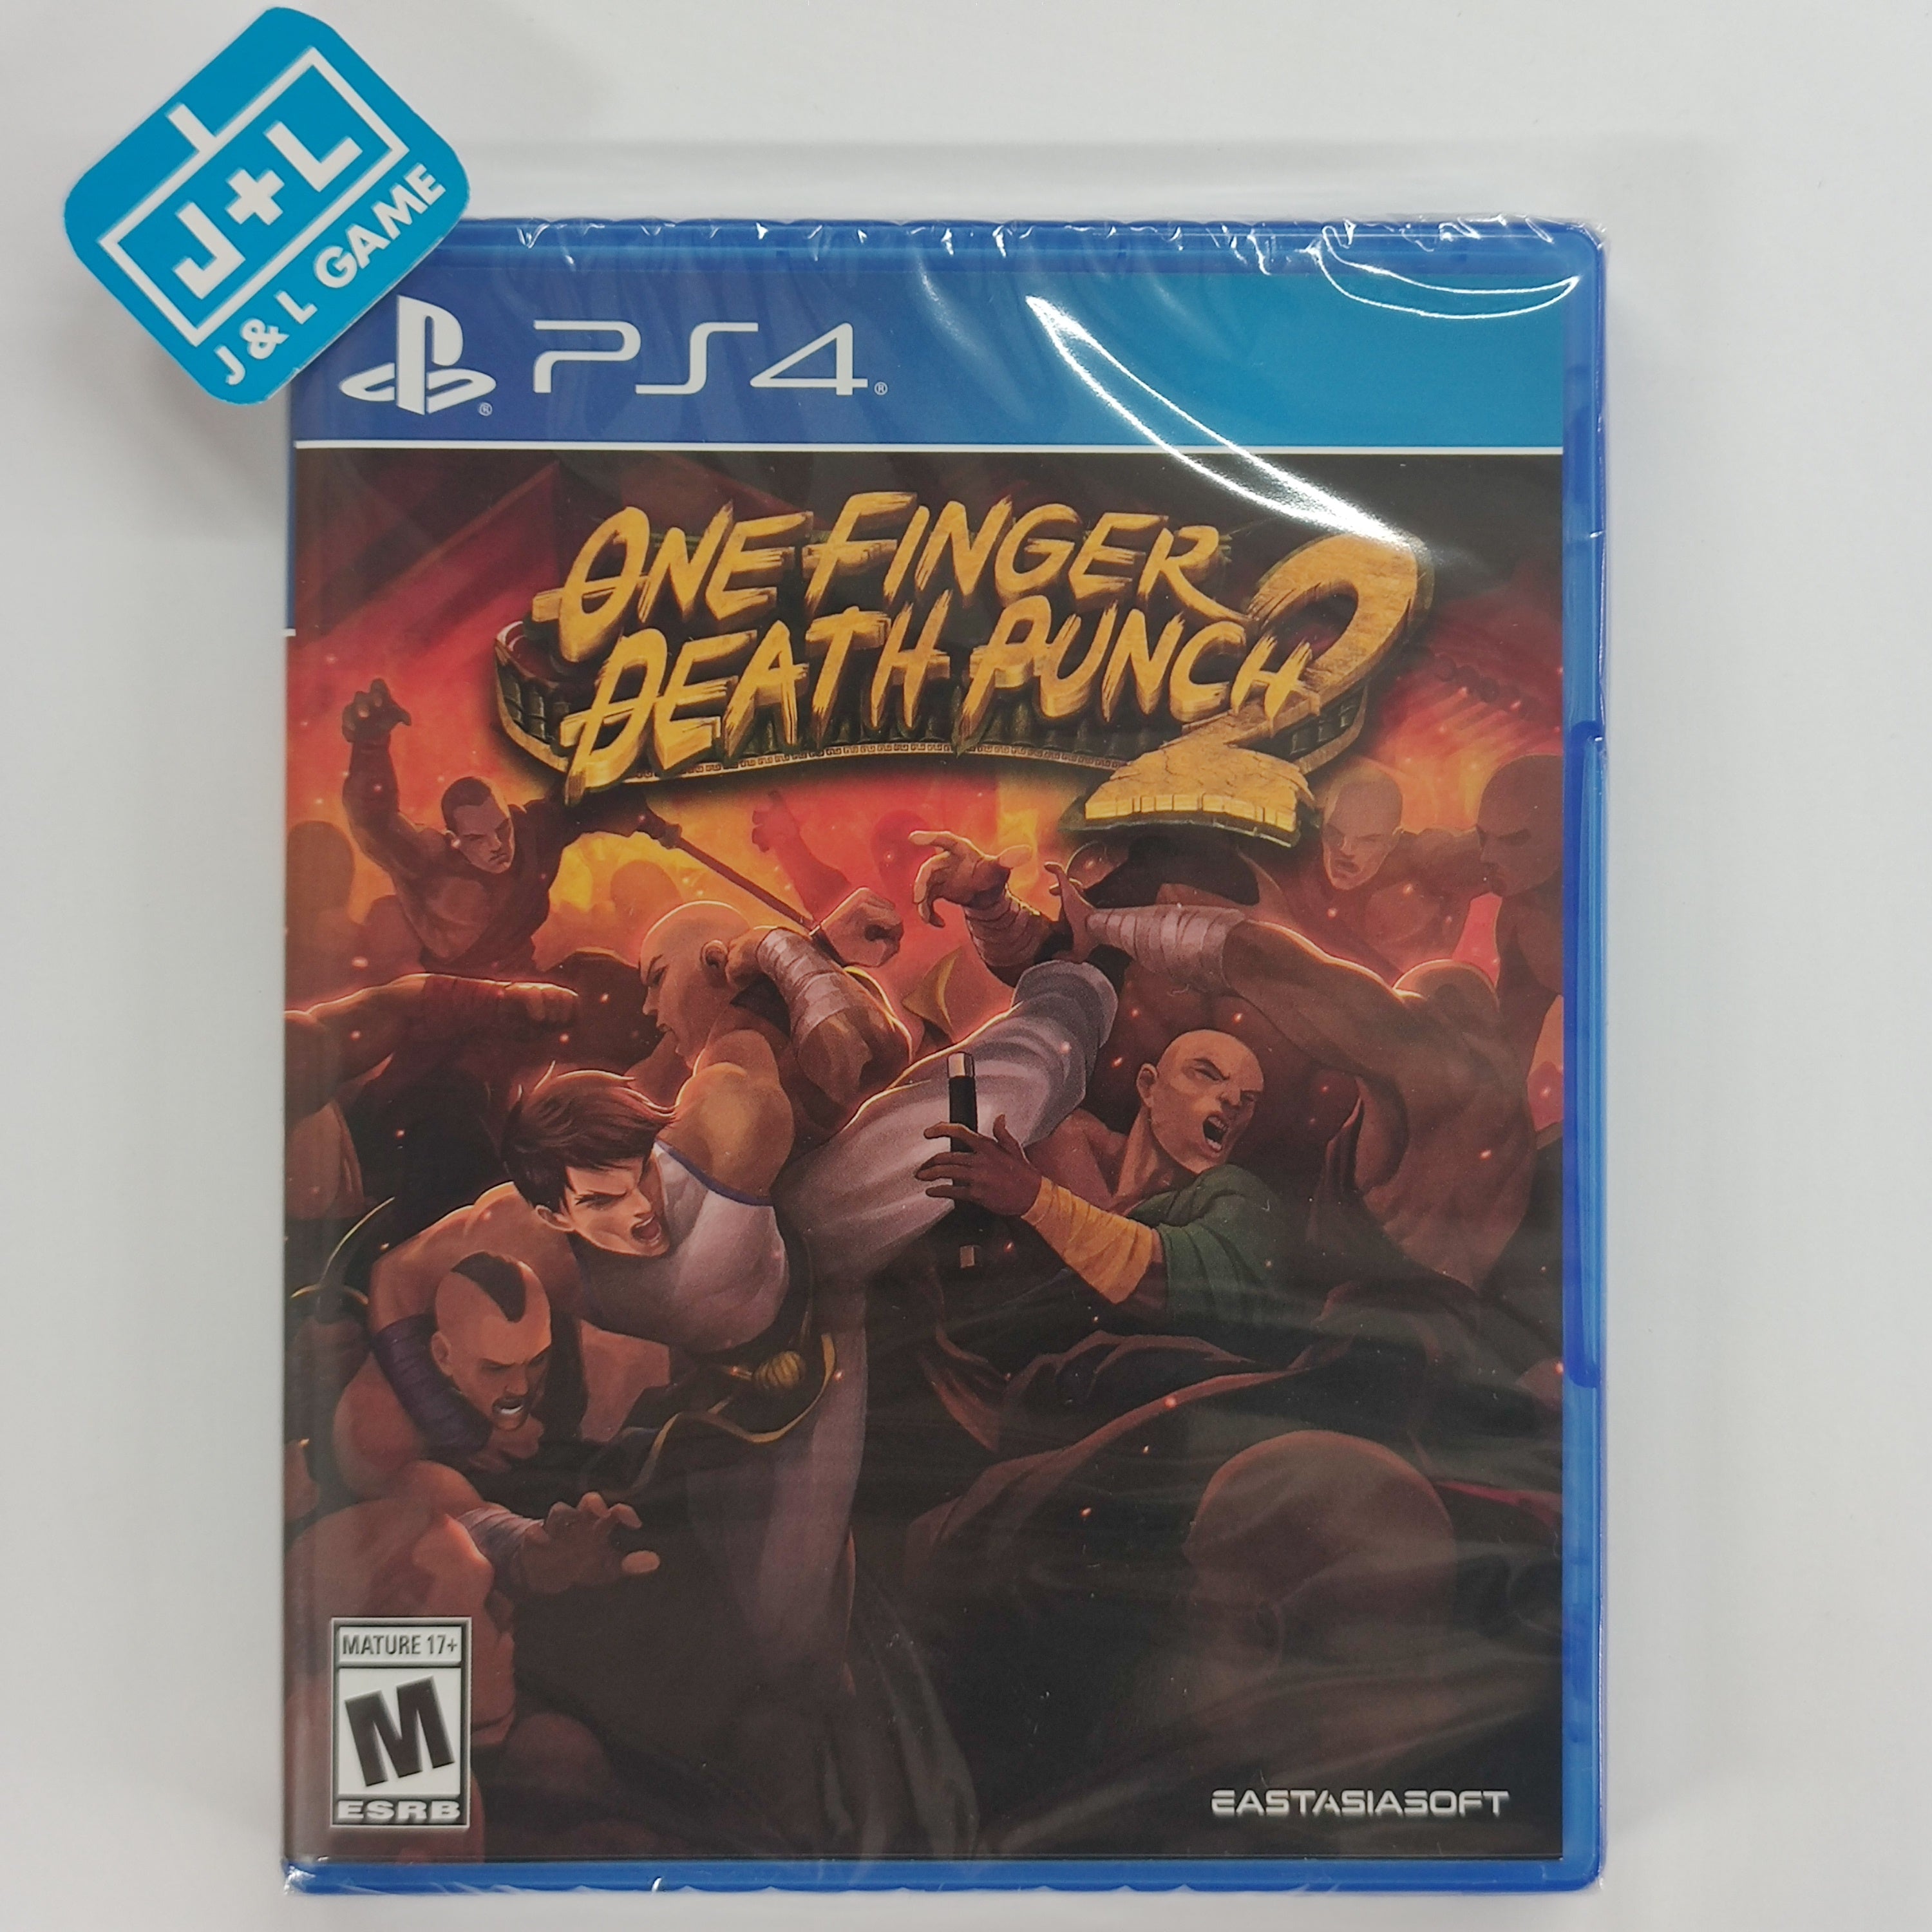 One Finger Death Punch 2 - (PS4) PlayStation 4 Video Games EastAsiaSoft   